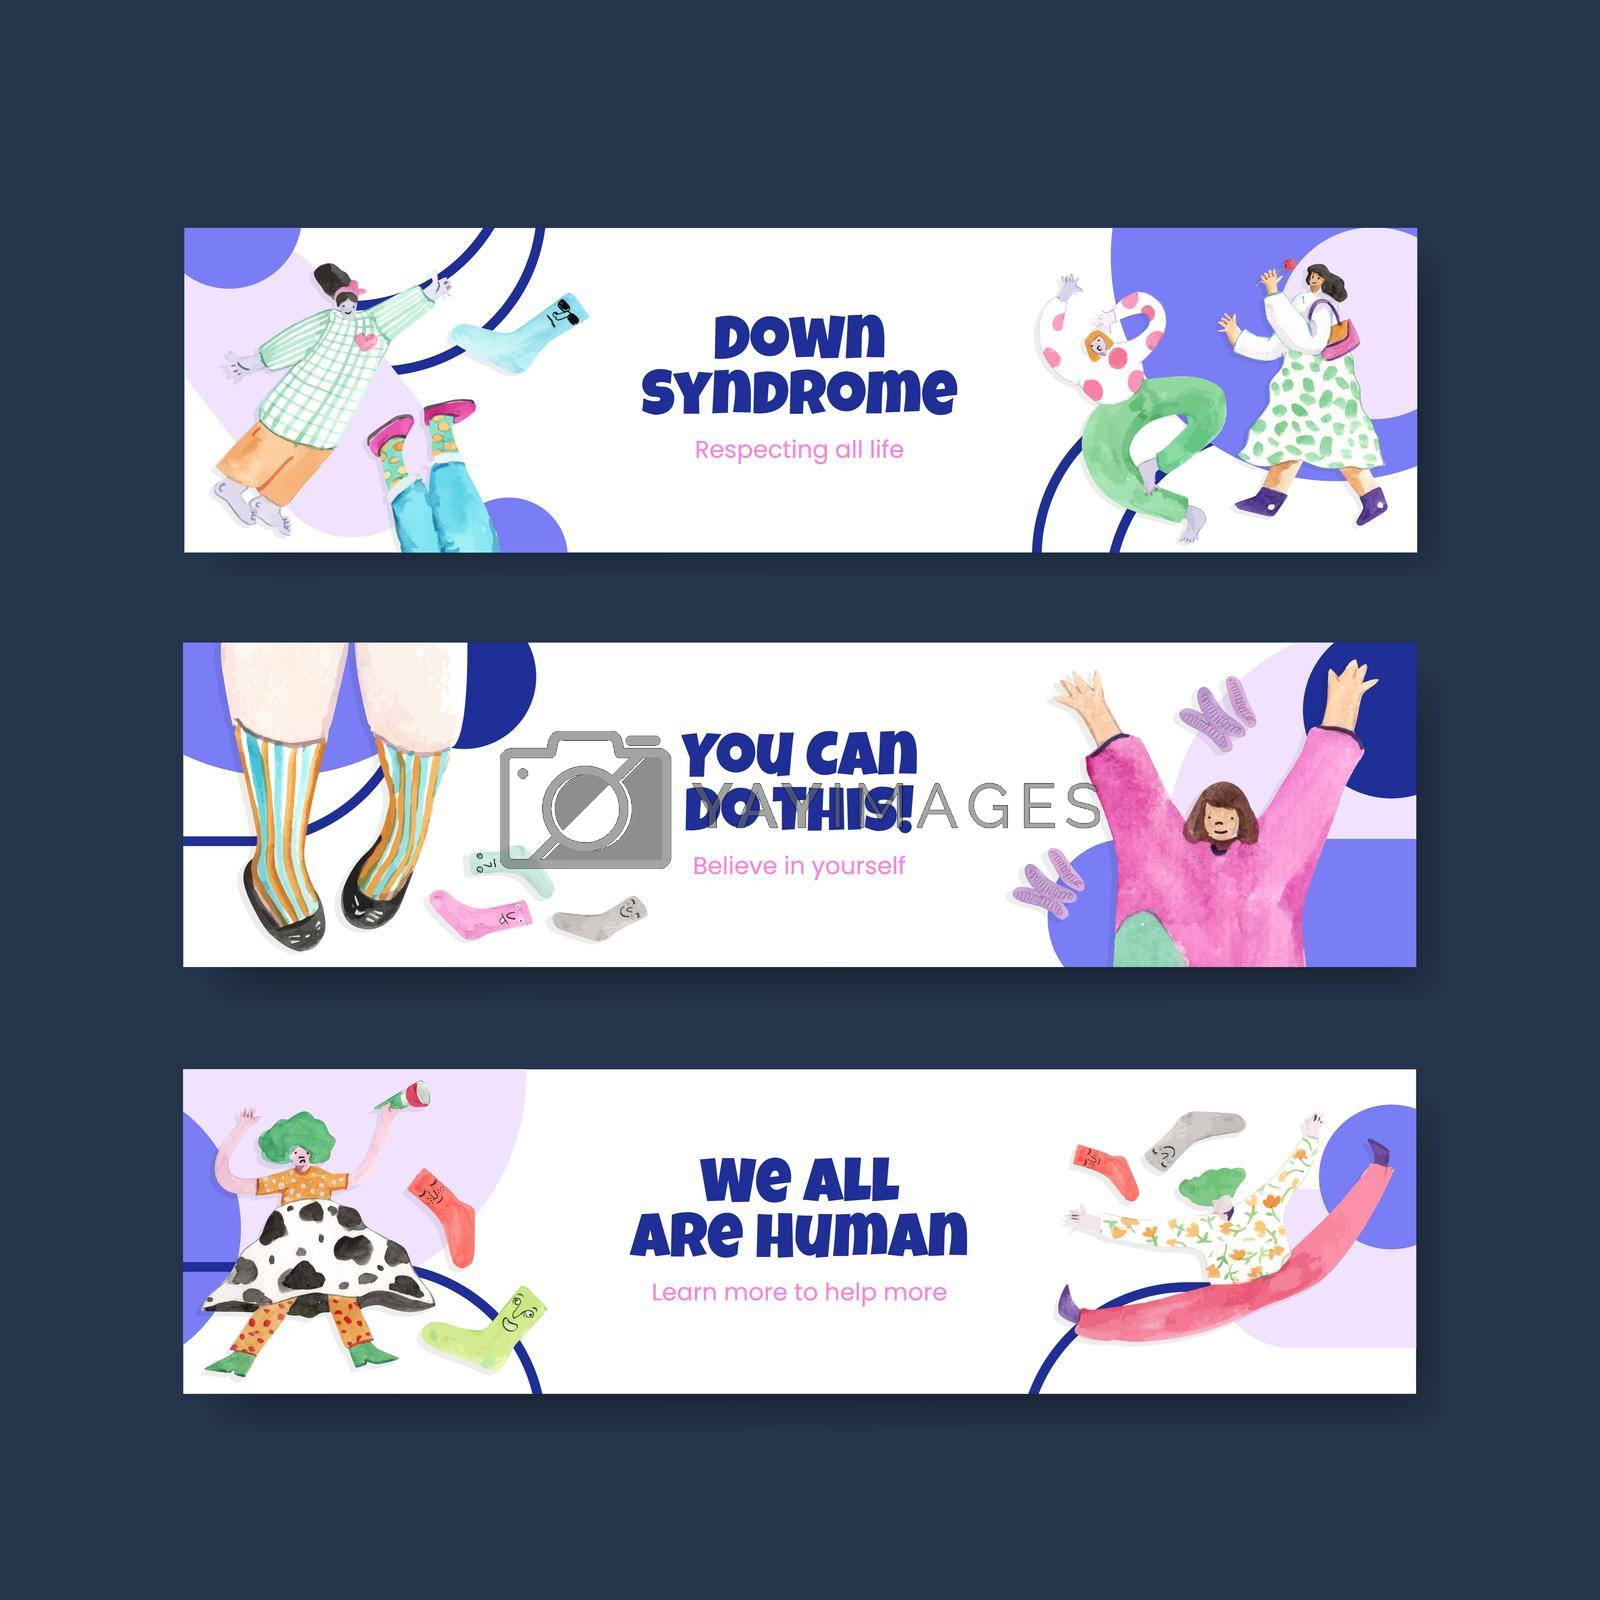 Royalty free image of Banner template with world down syndrome day concept design for advertise and marketing watercolor illustration by Photographeeasia